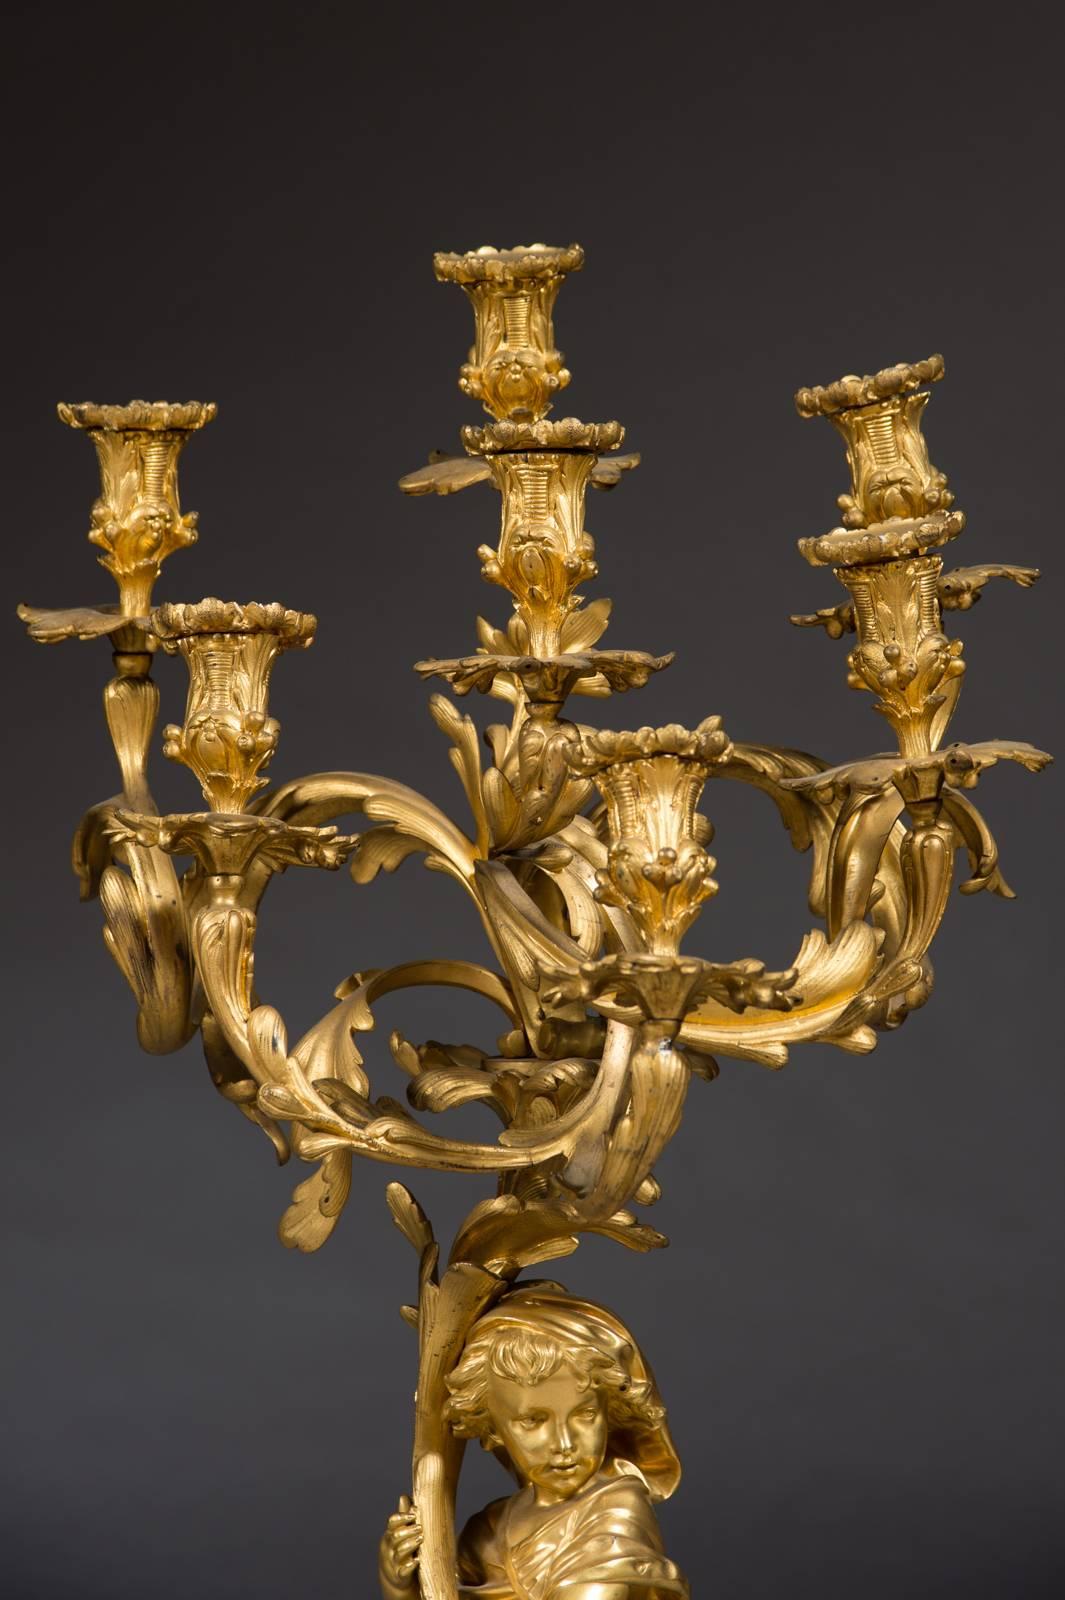 Very Fine Pair of 19th Century French Gilt Bronze Candelabras by Victor Raulin In Good Condition For Sale In Los Angeles, CA